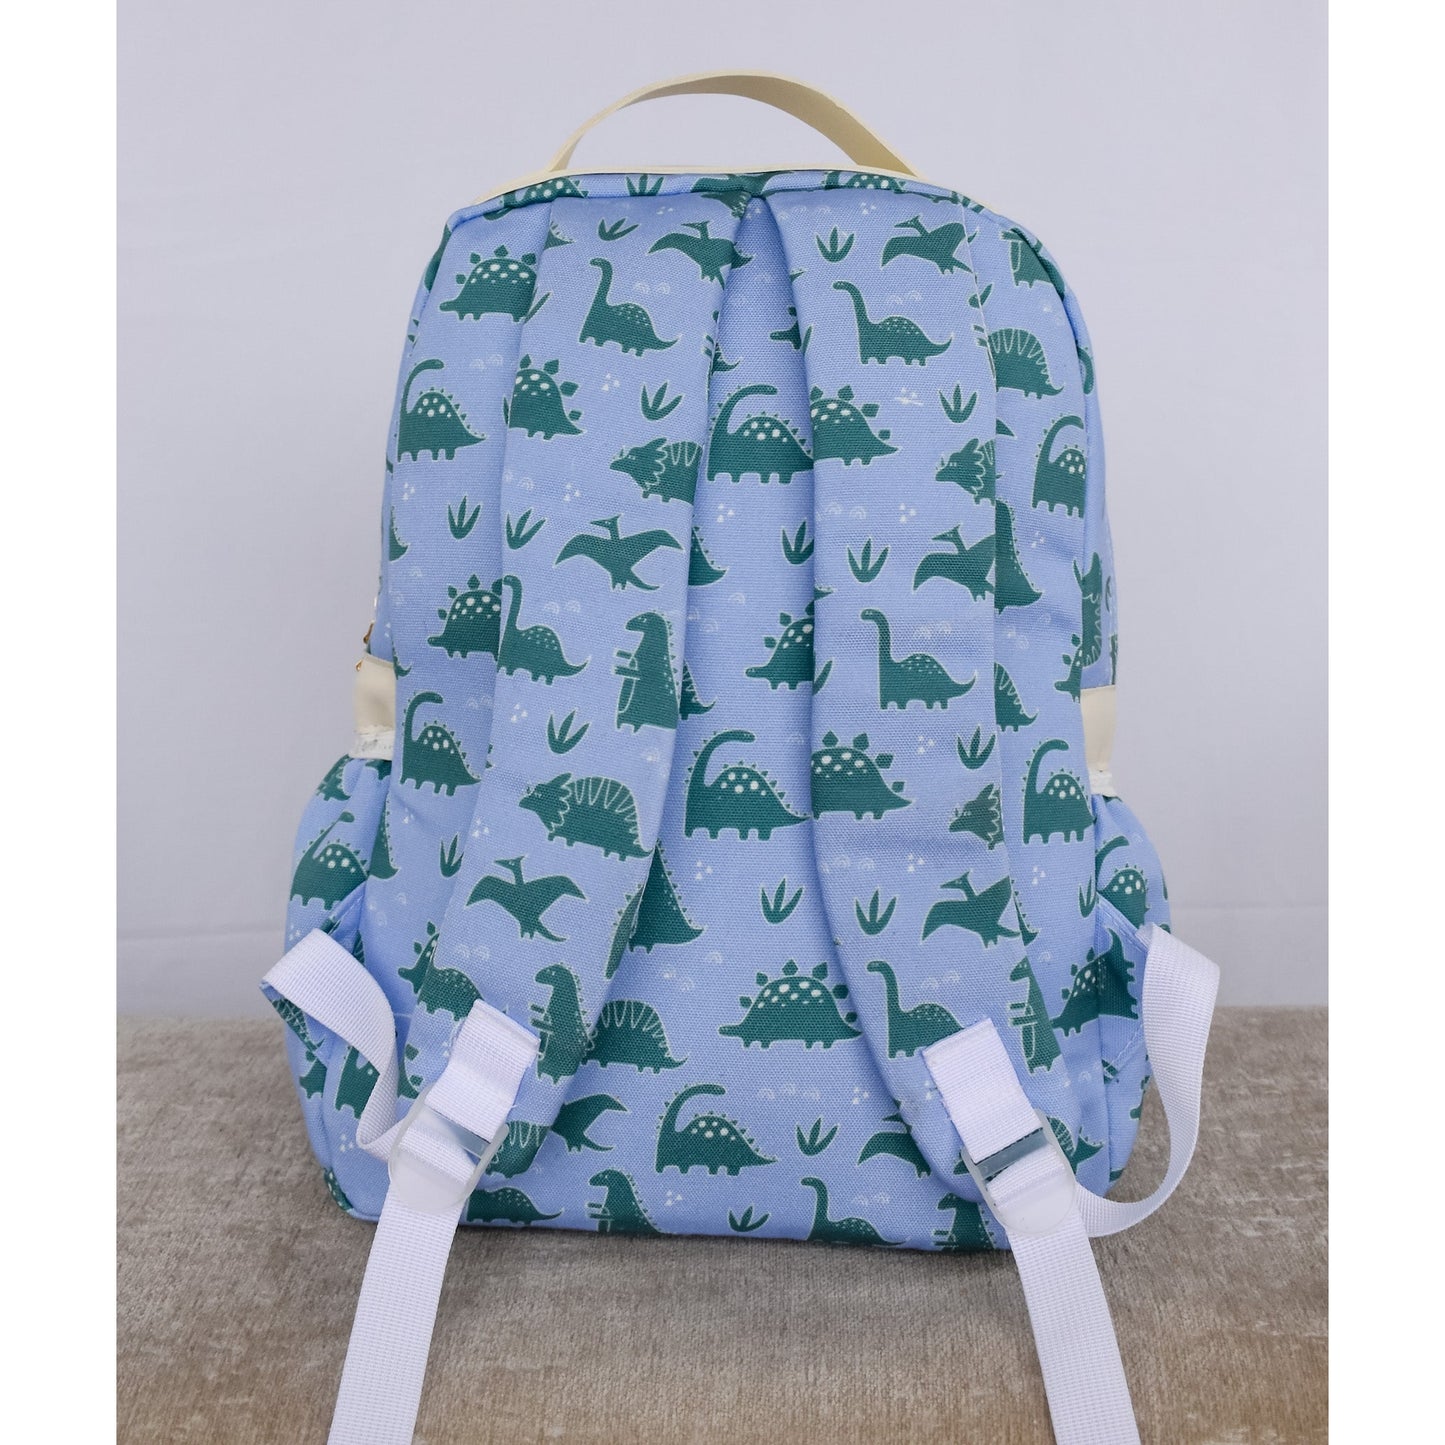 Dinosaurs Backpack